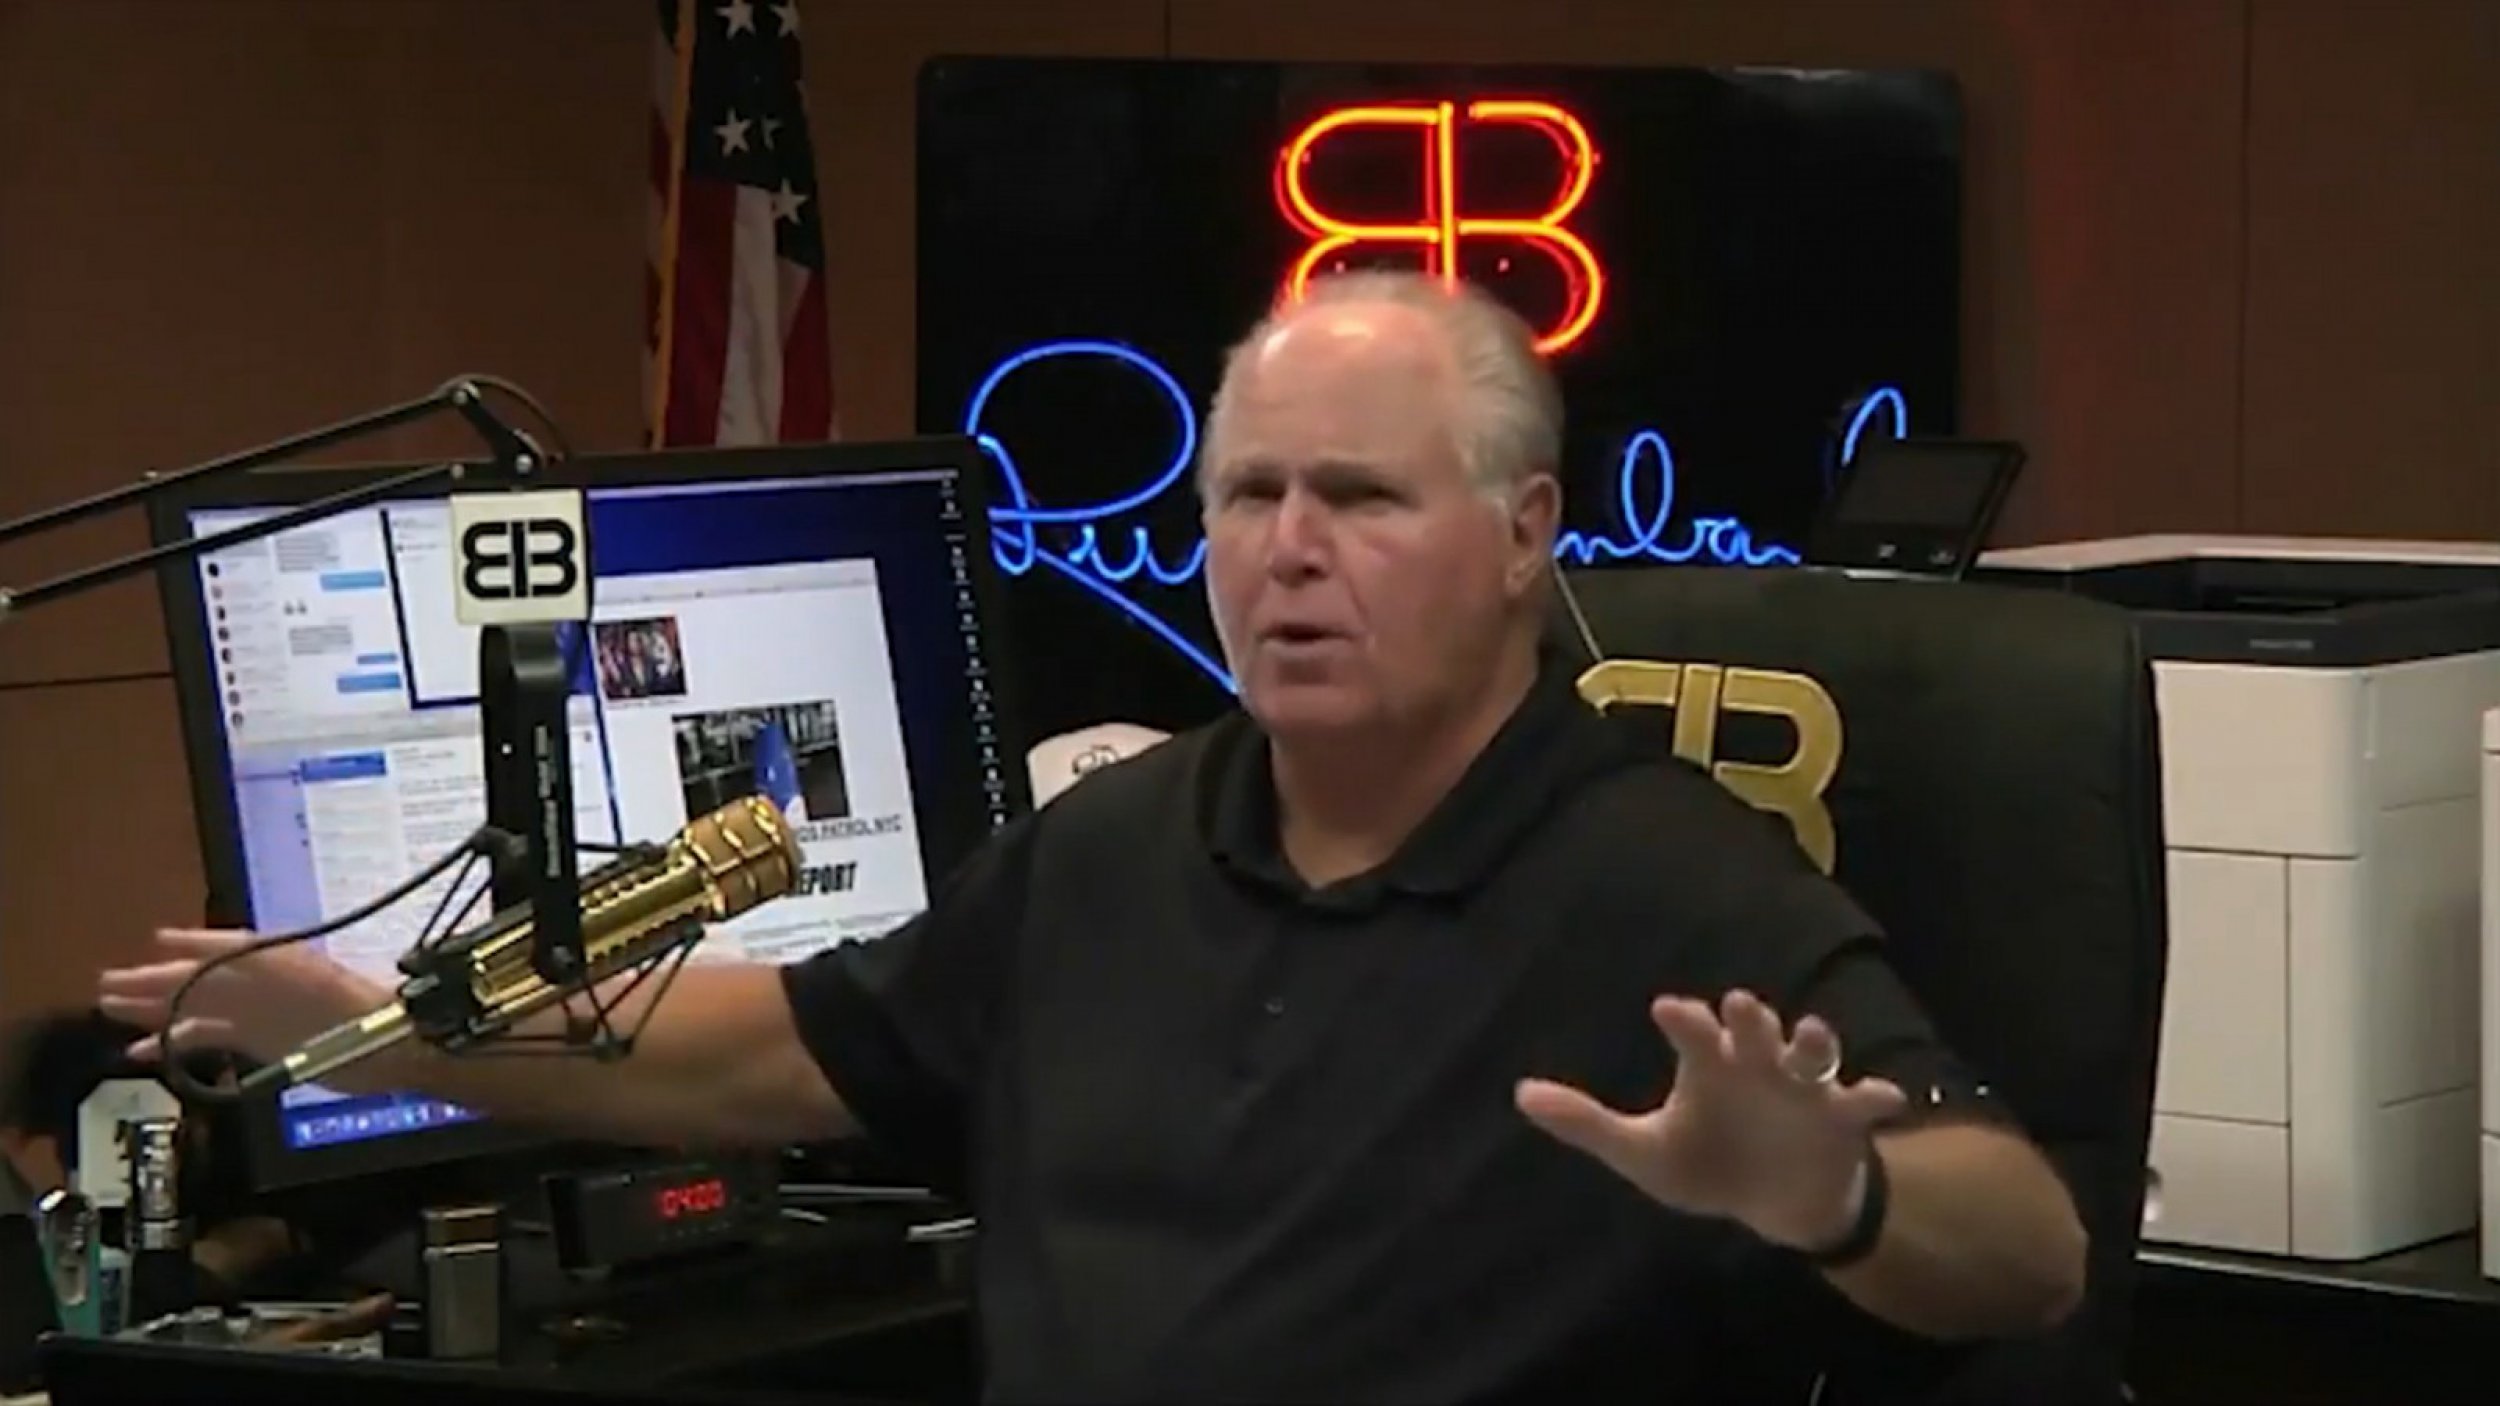 Rush Limbaugh Says Jamal Khashoggi Is A So-Called Journalist Whose Murder Has Not Been Proved